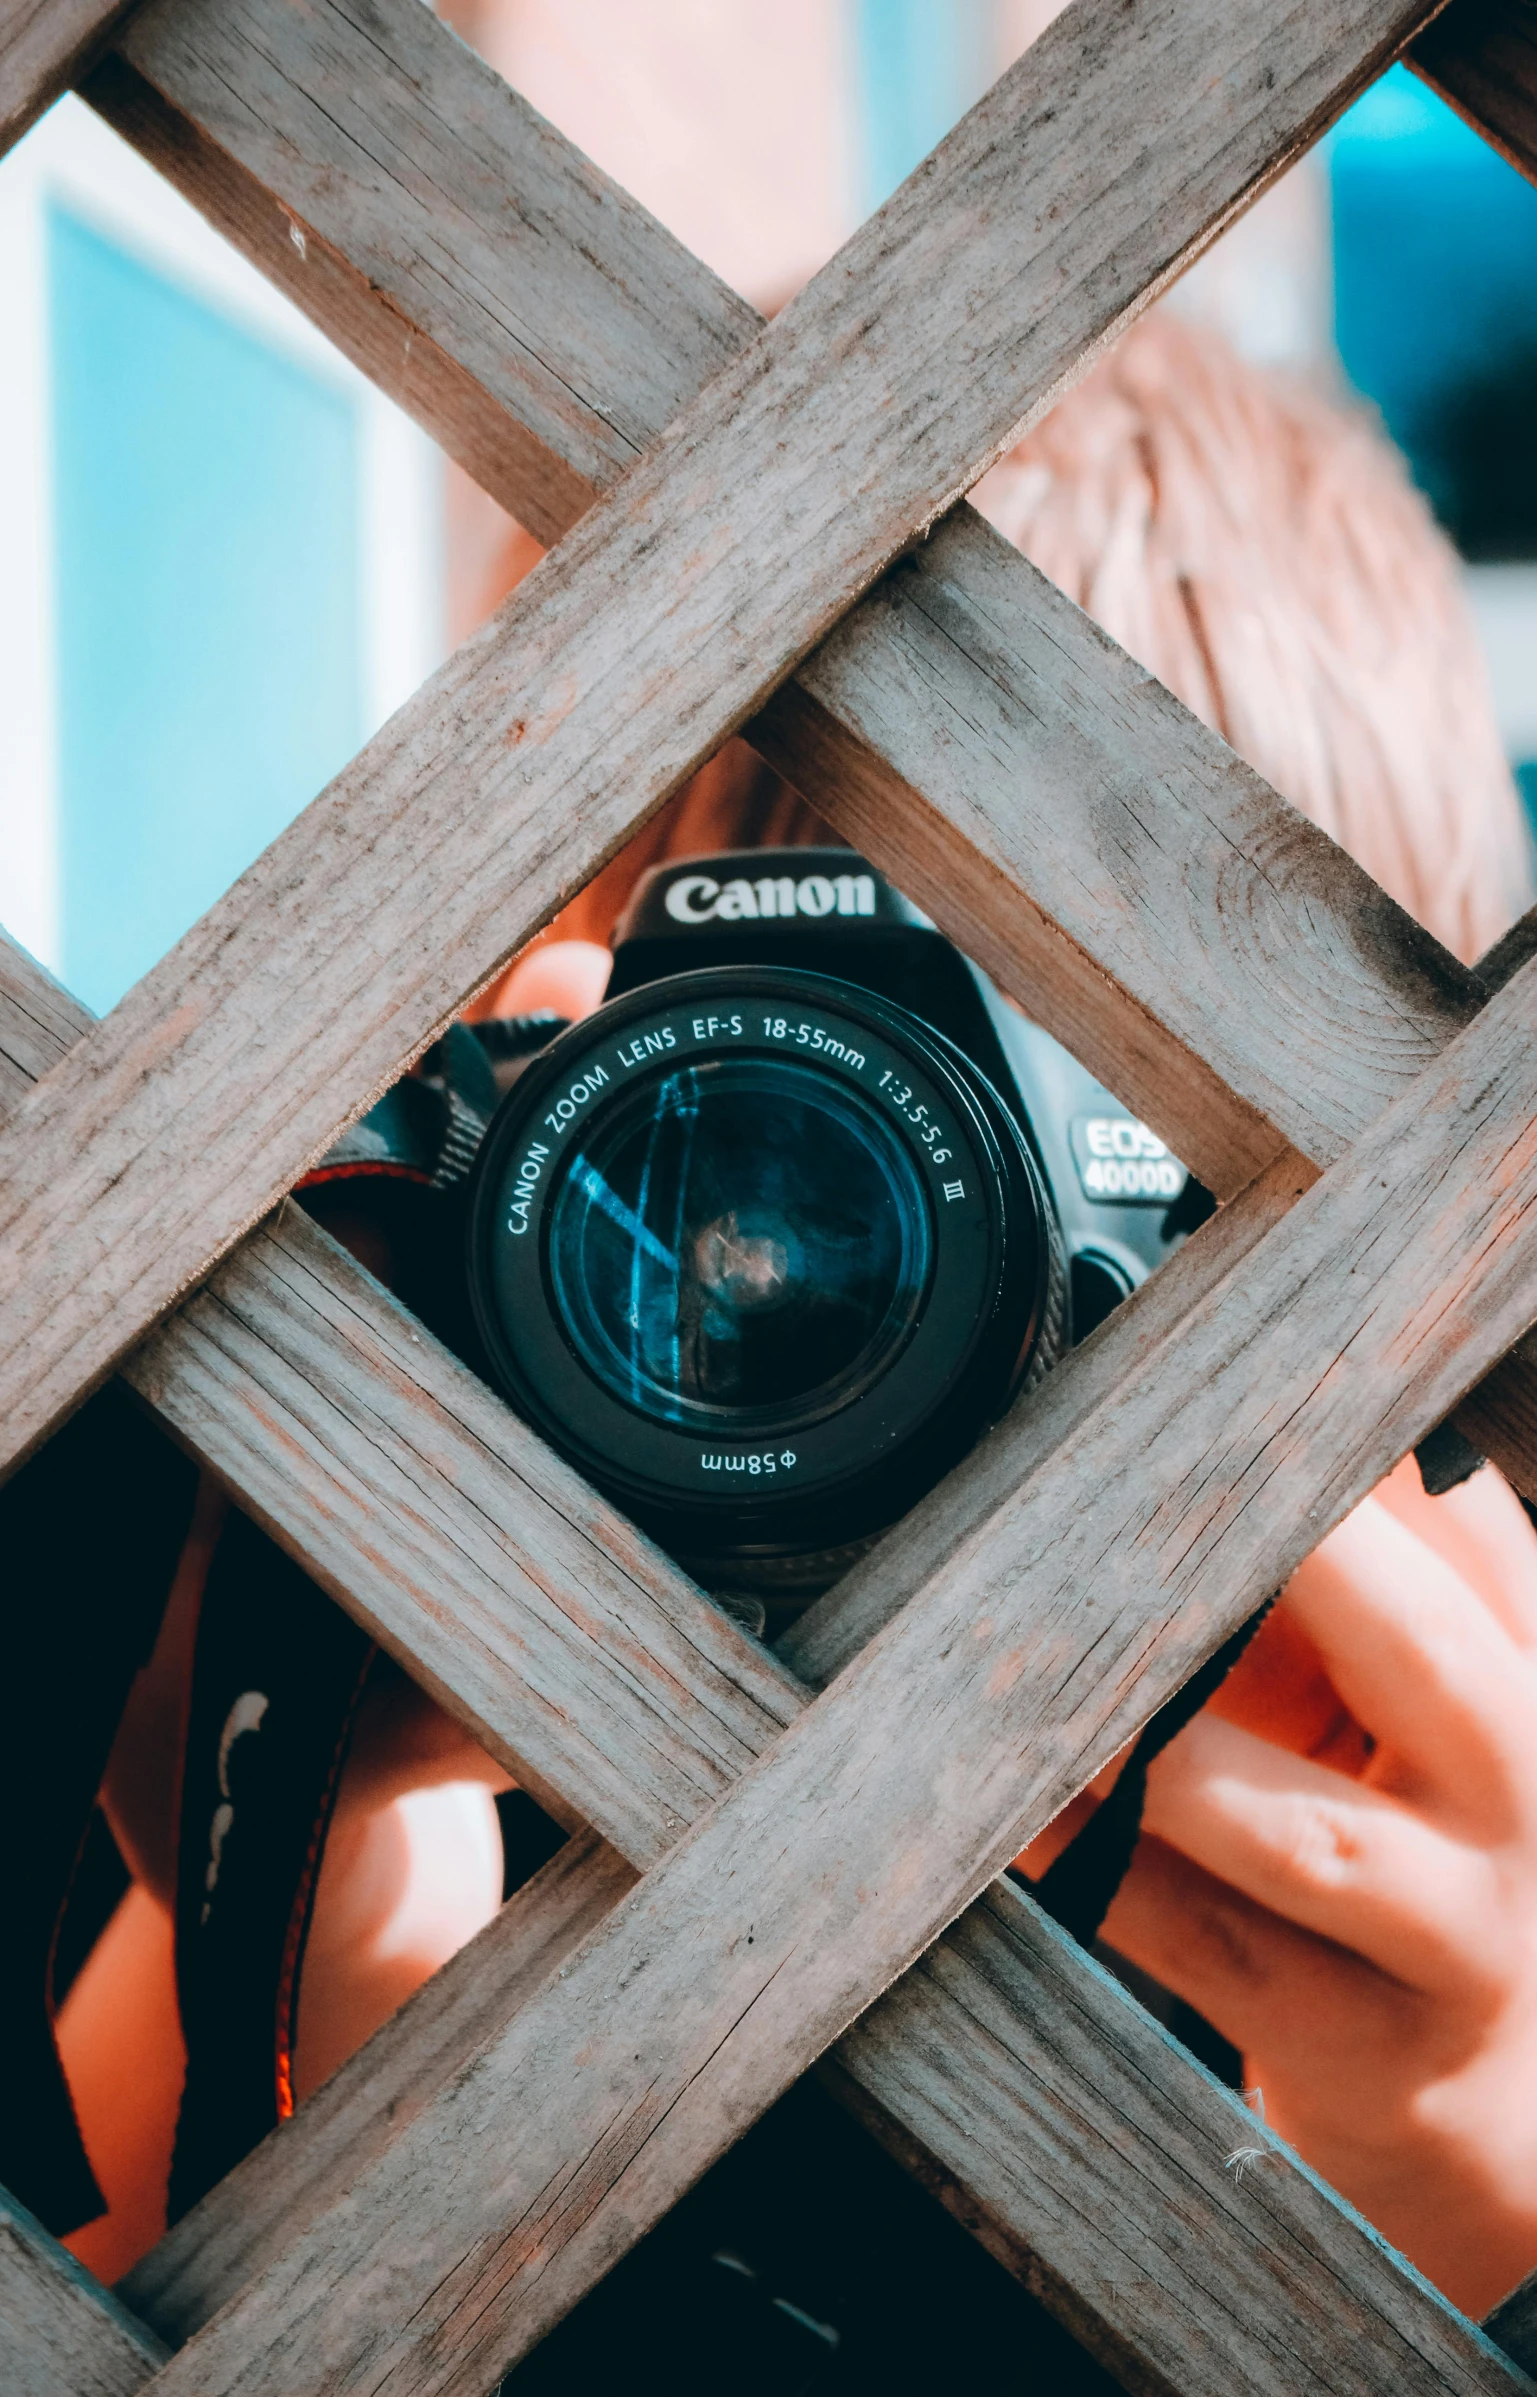 the girl takes a picture with her camera through the wooden bars